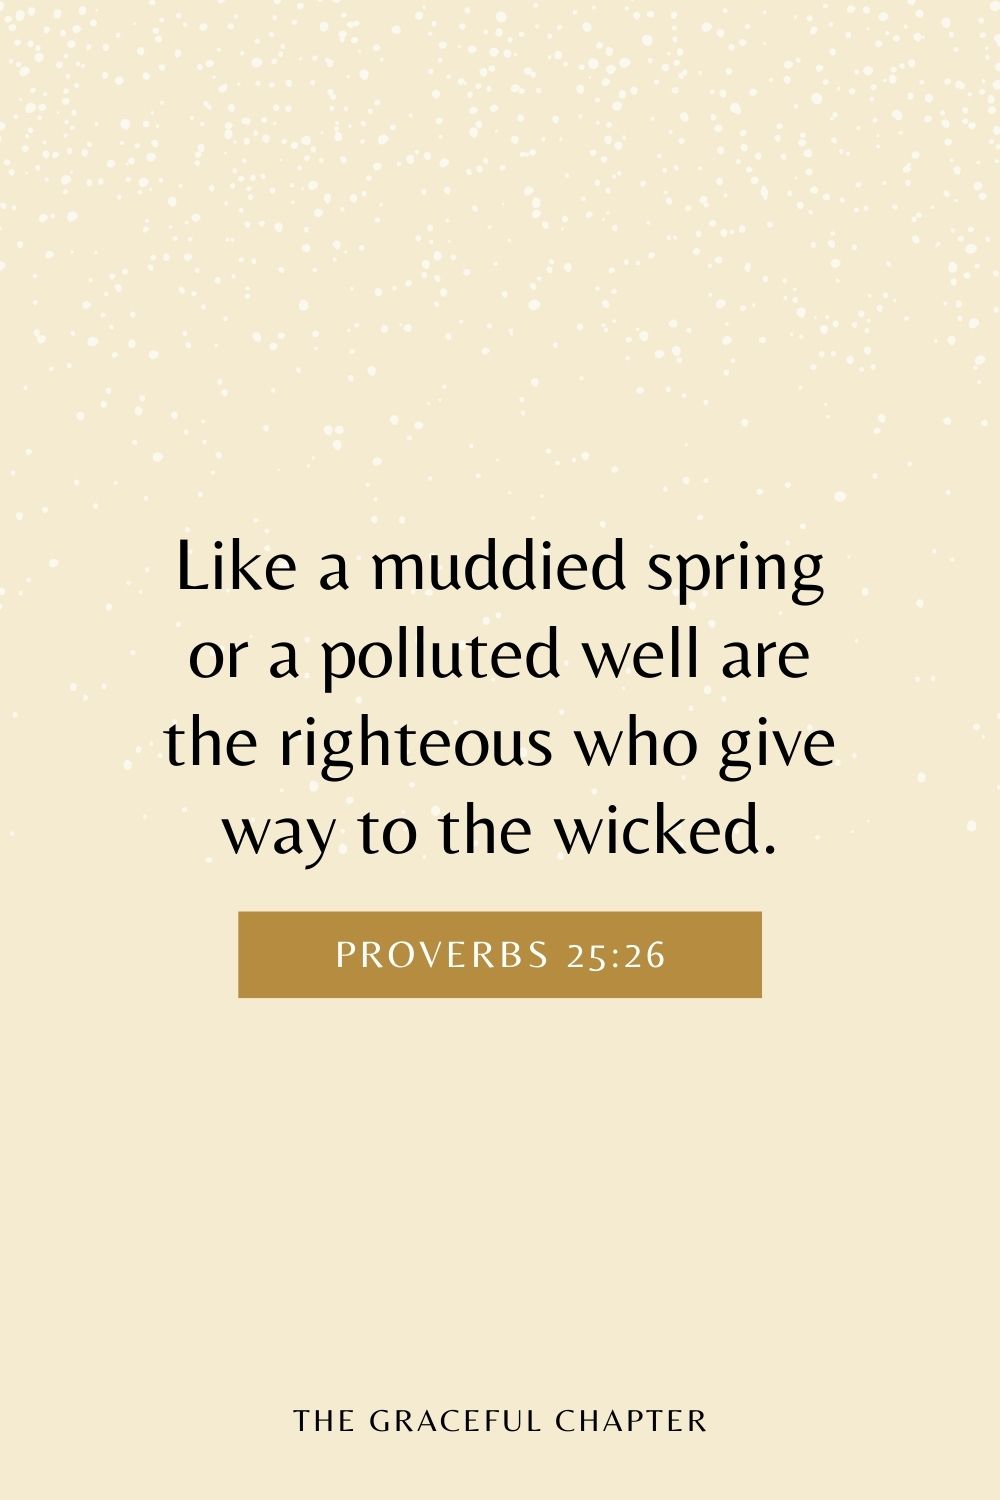 Like a muddied spring or a polluted well are the righteous who give way to the wicked. Proverbs 25:26